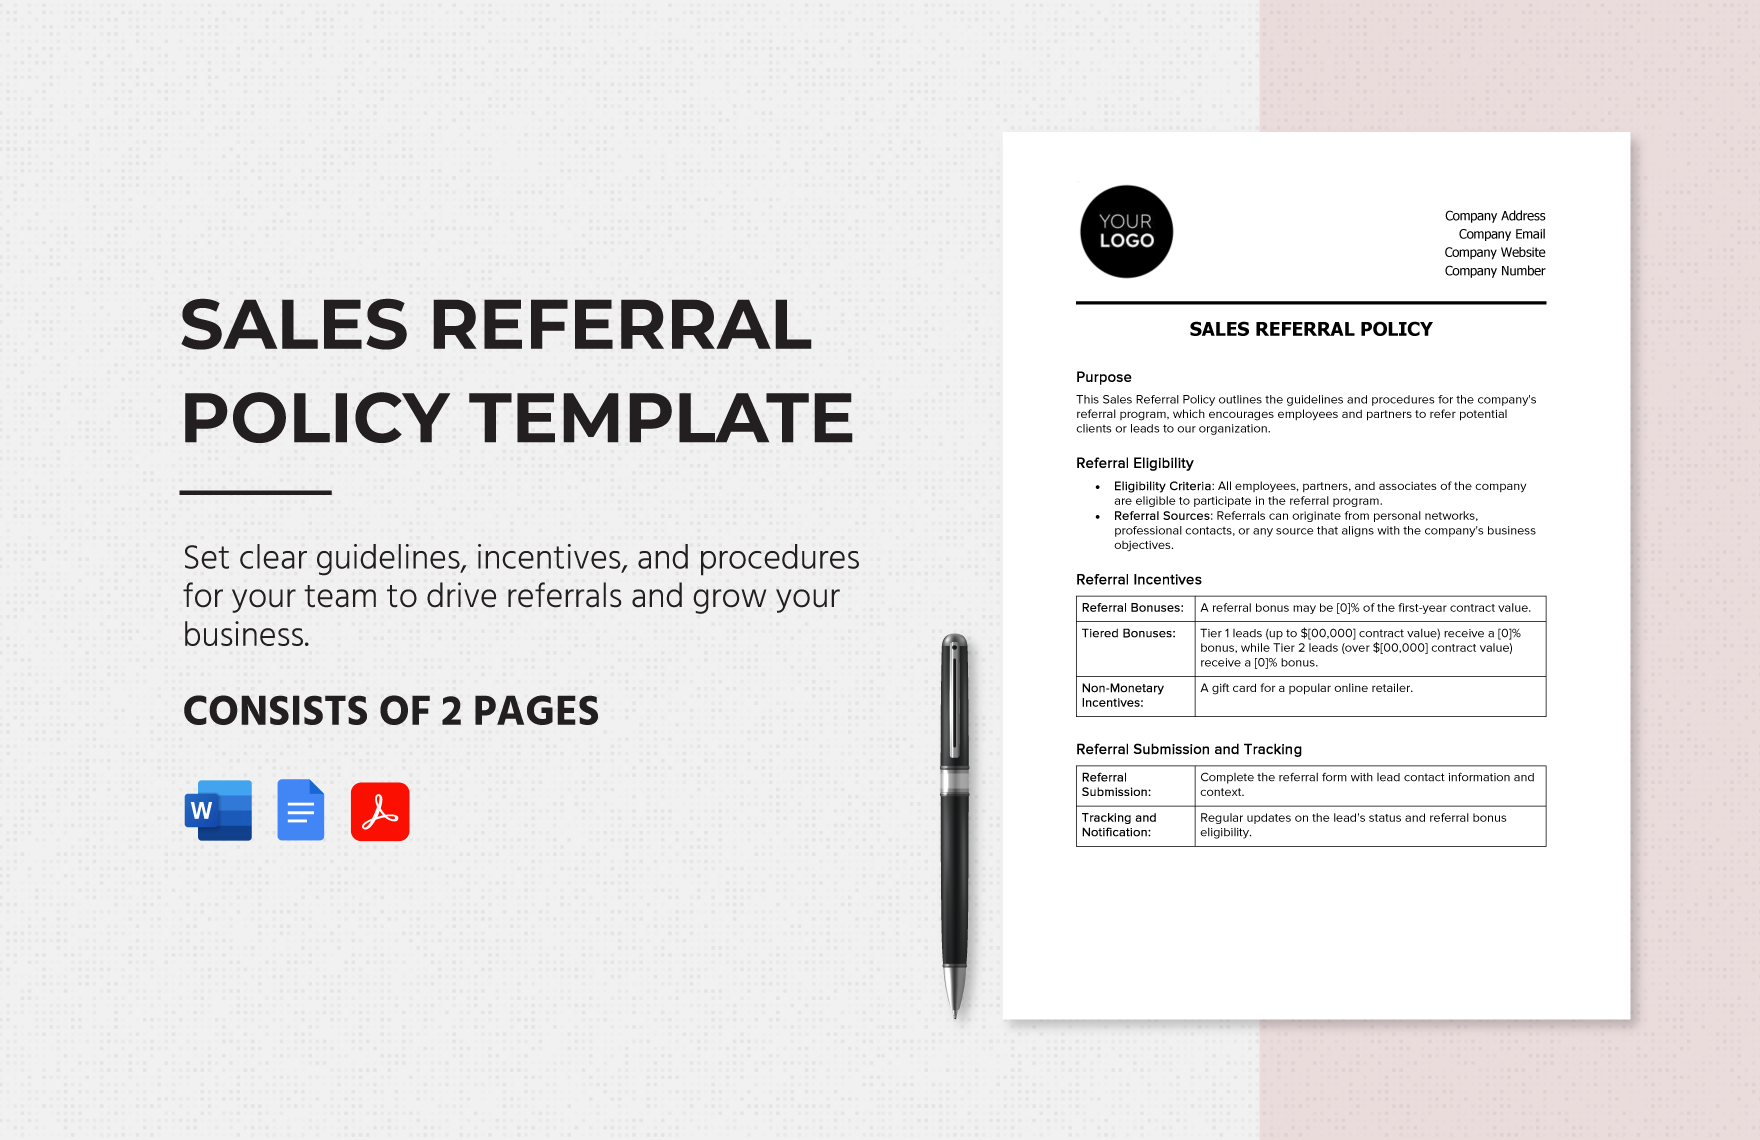 Sales Referral Policy Template in Word, Google Docs, PDF